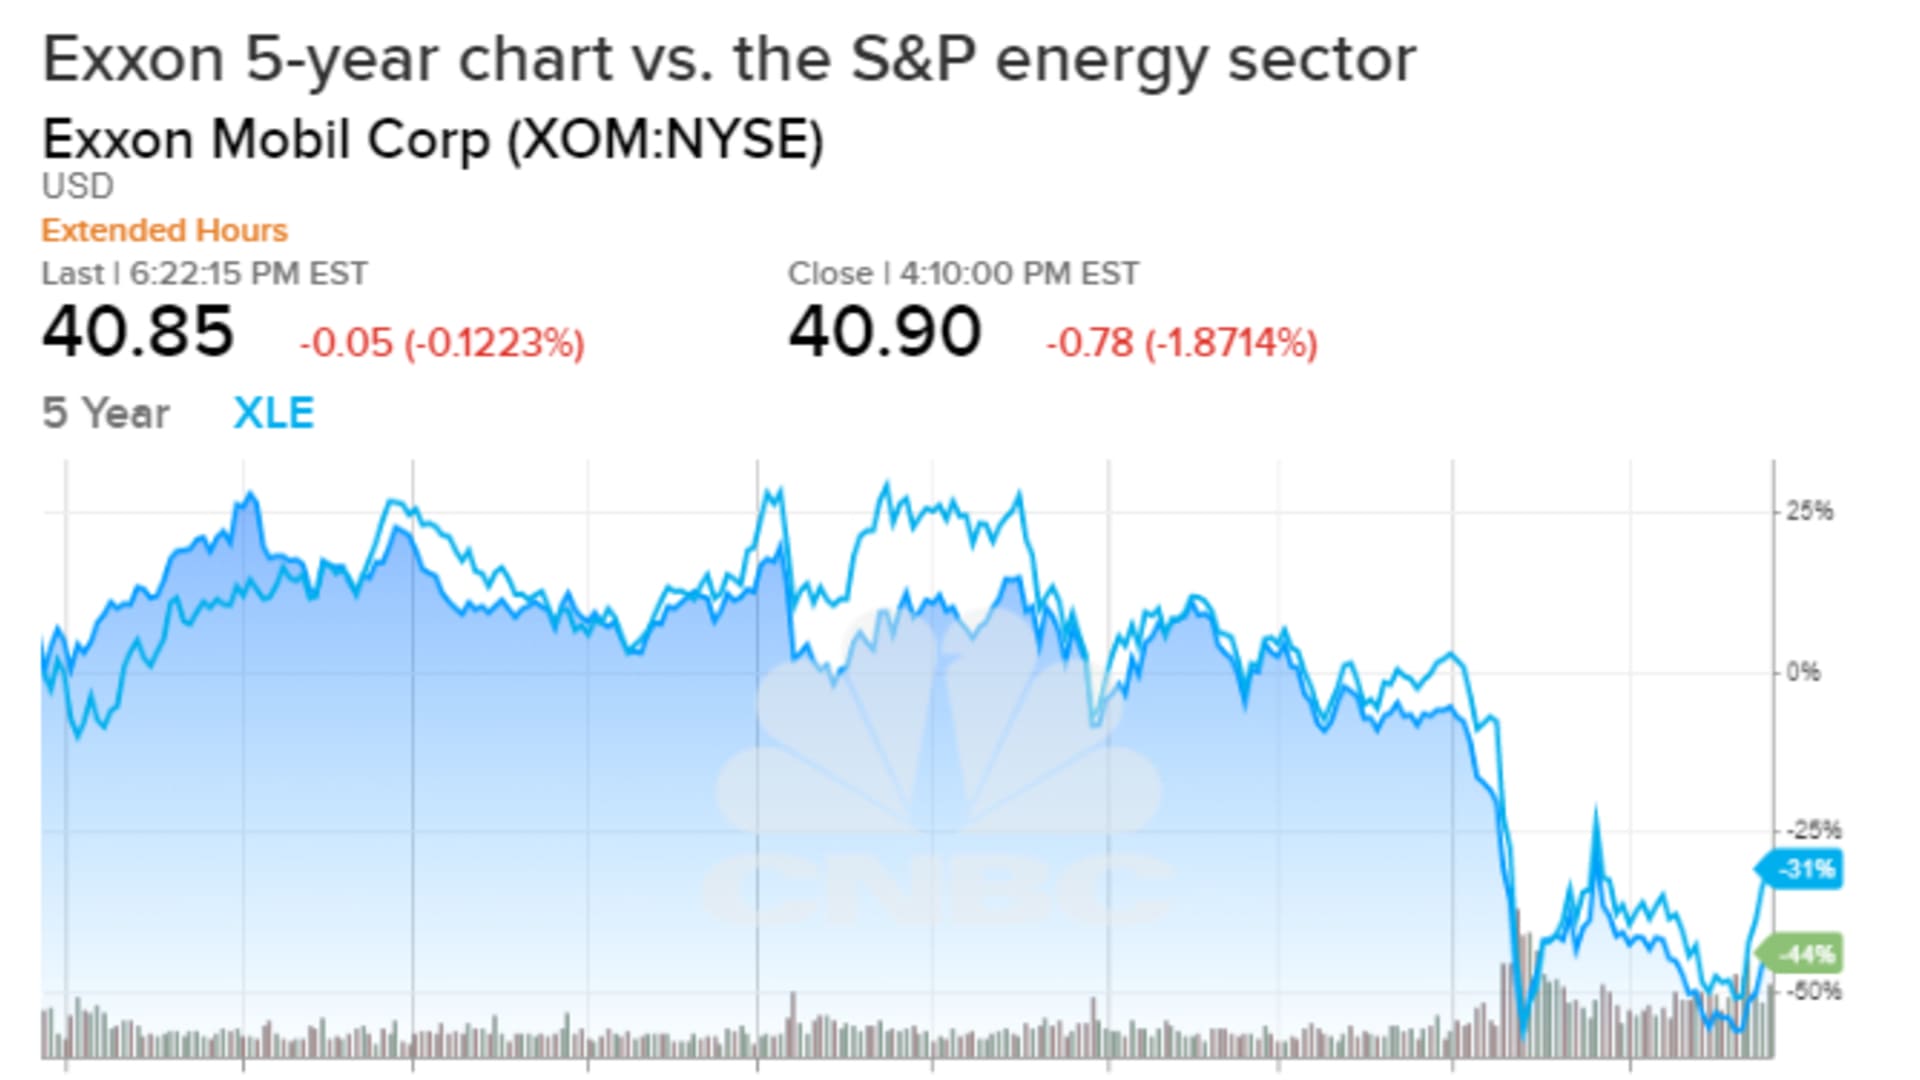 Exxon Mobil shares have been weakened by low crude oil and natural gas prices, as well as the Covid-19 downturn, but it has been a laggard in its energy sector peer group in recent years.